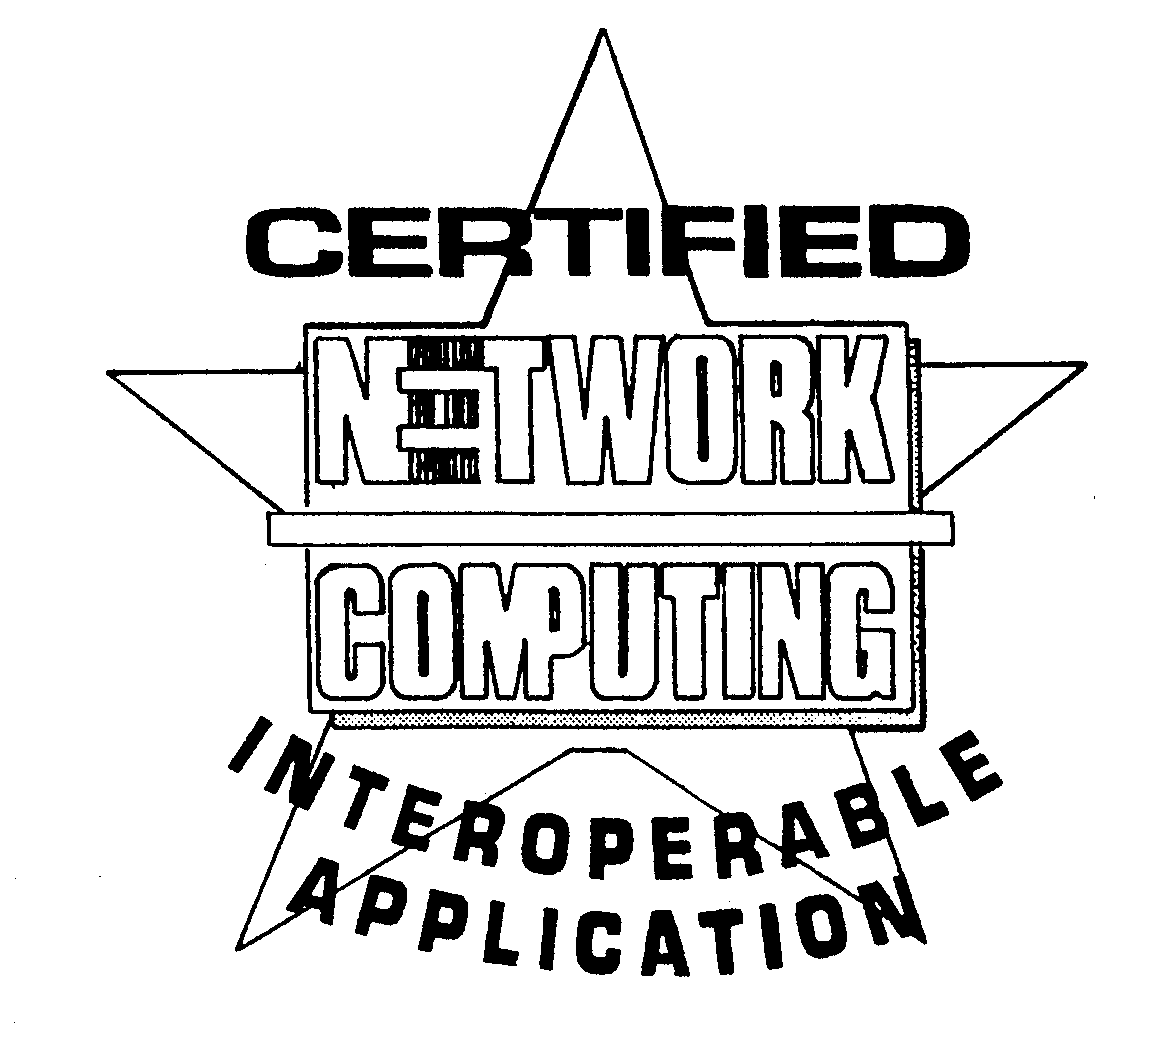  CERTIFIED NETWORK COMPUTING INTEROPERABLE APPLICATION